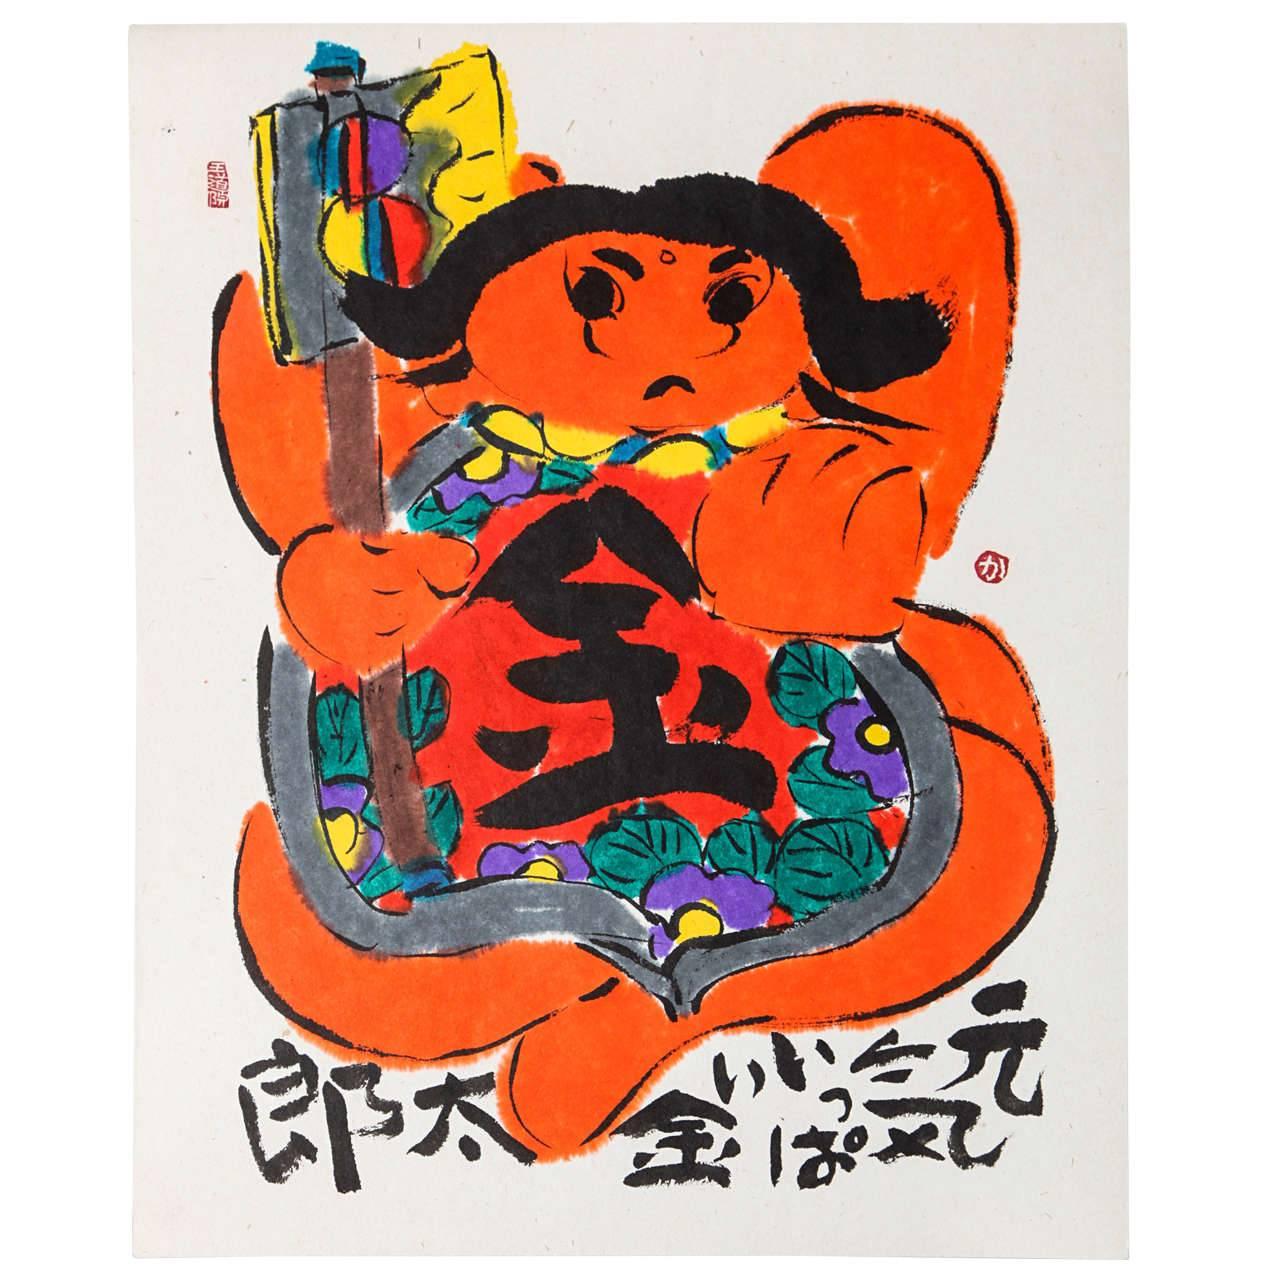 A Classic Buddha with a twist and more. This Japanese work of art is very playful and colorful. The painting has vibrant orange color and power.